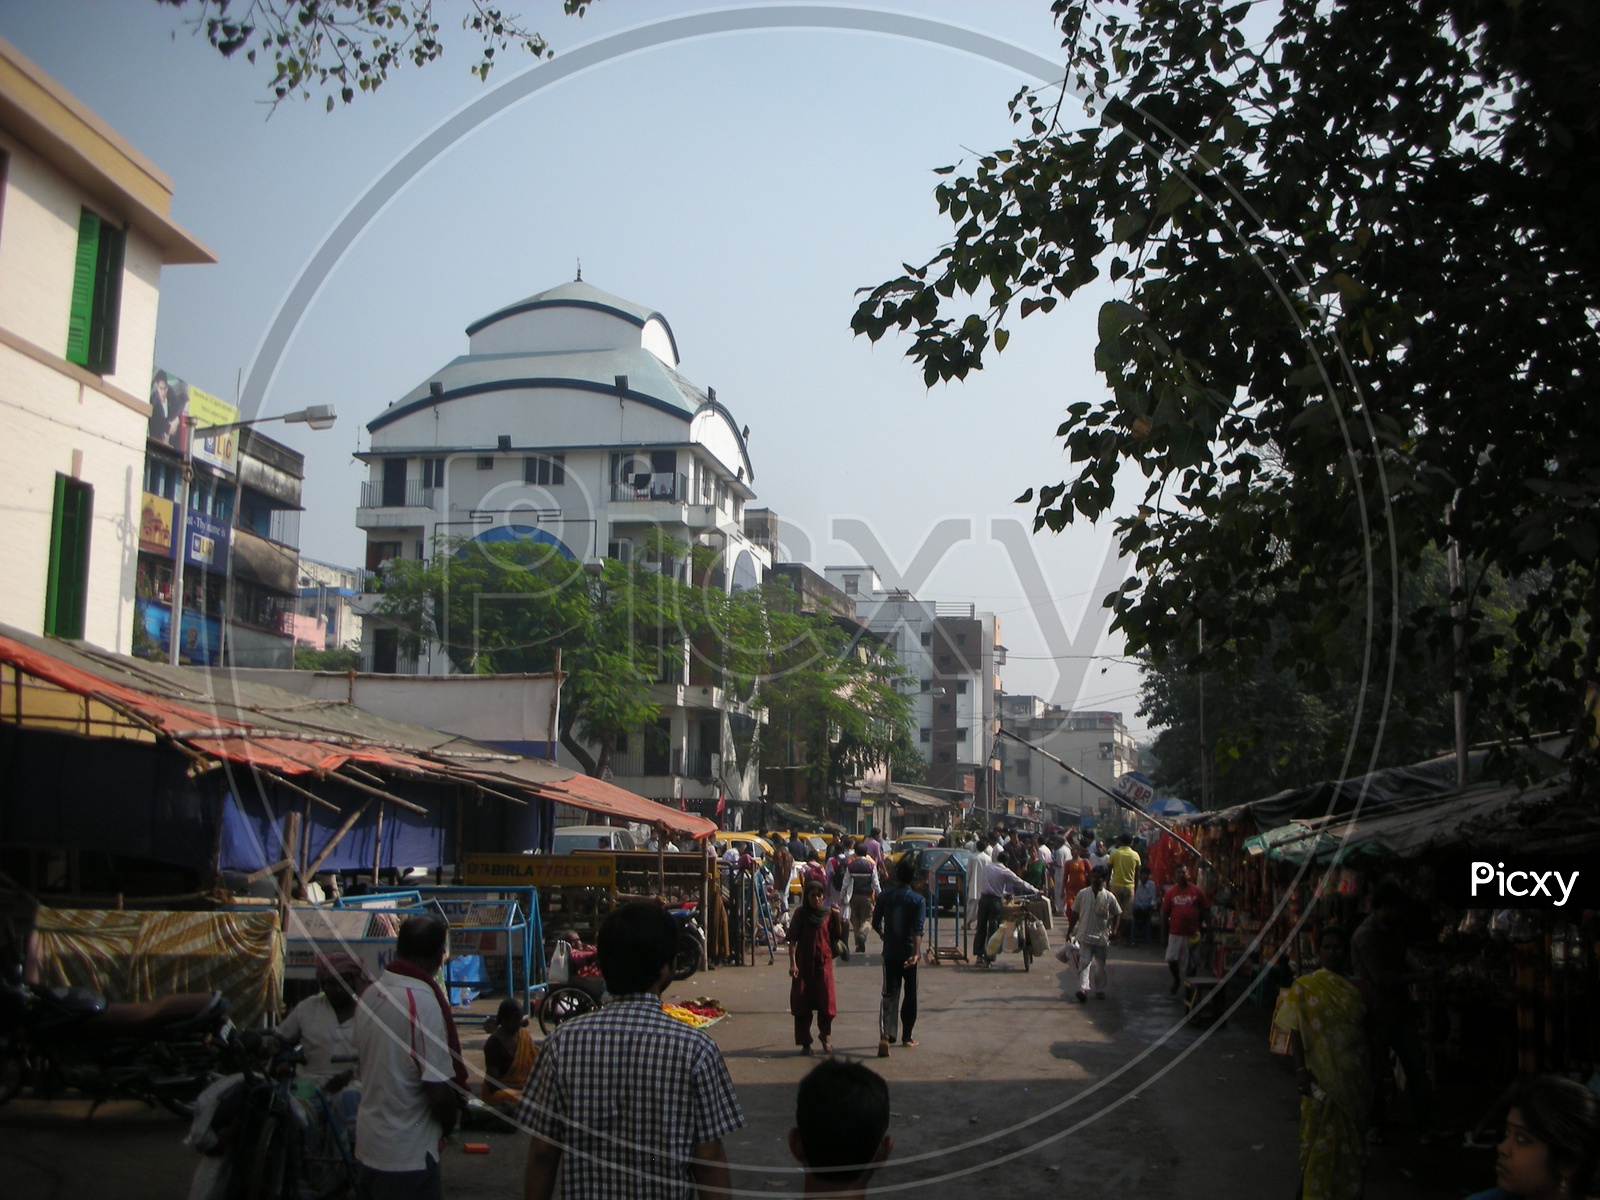 Busy Streets Of Kolkata  With Vendor Shops